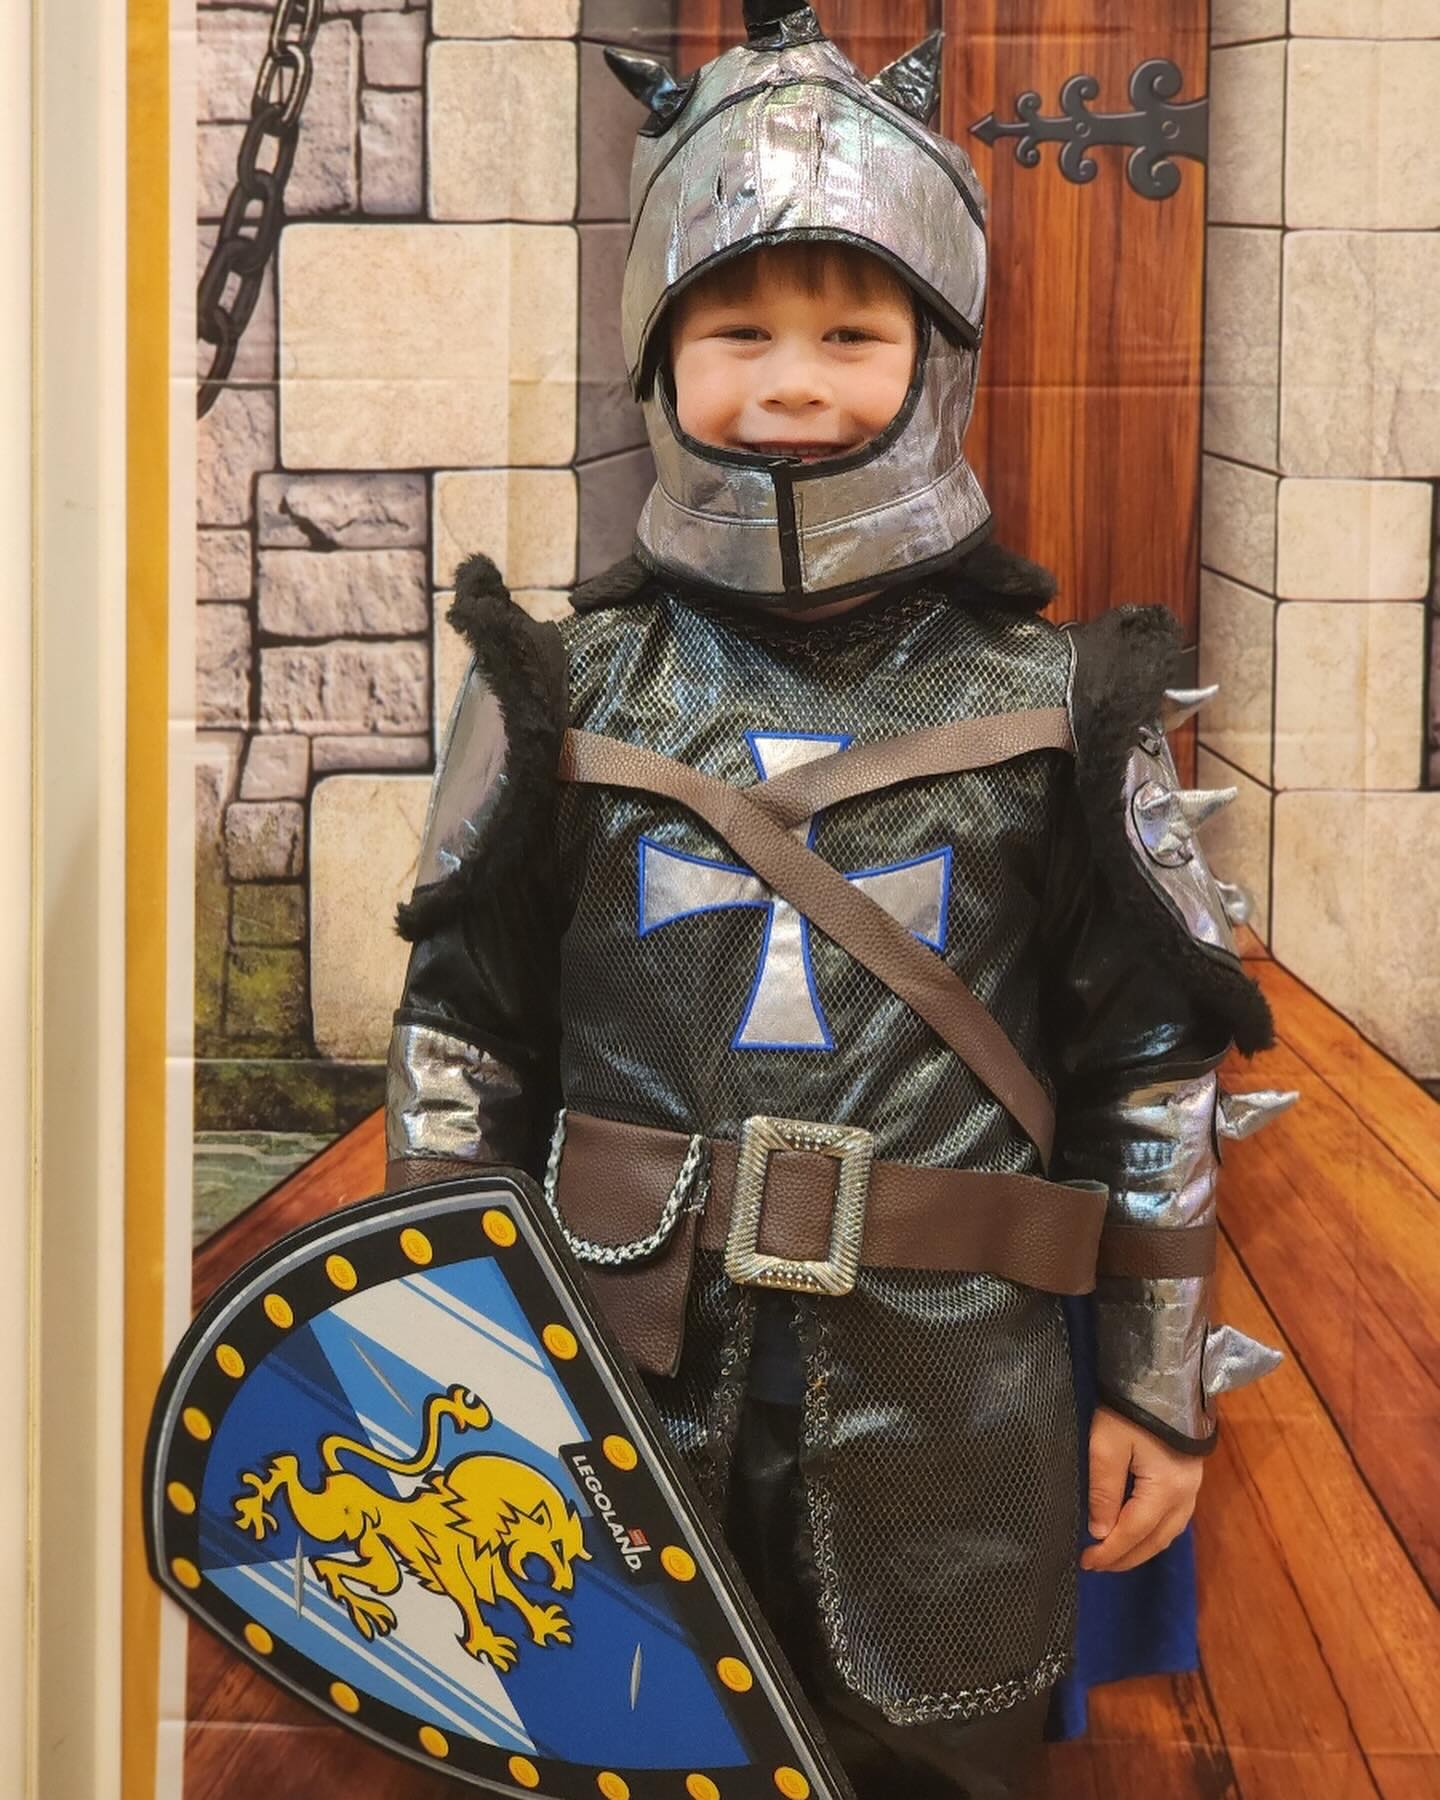 tgs student dressed as knight